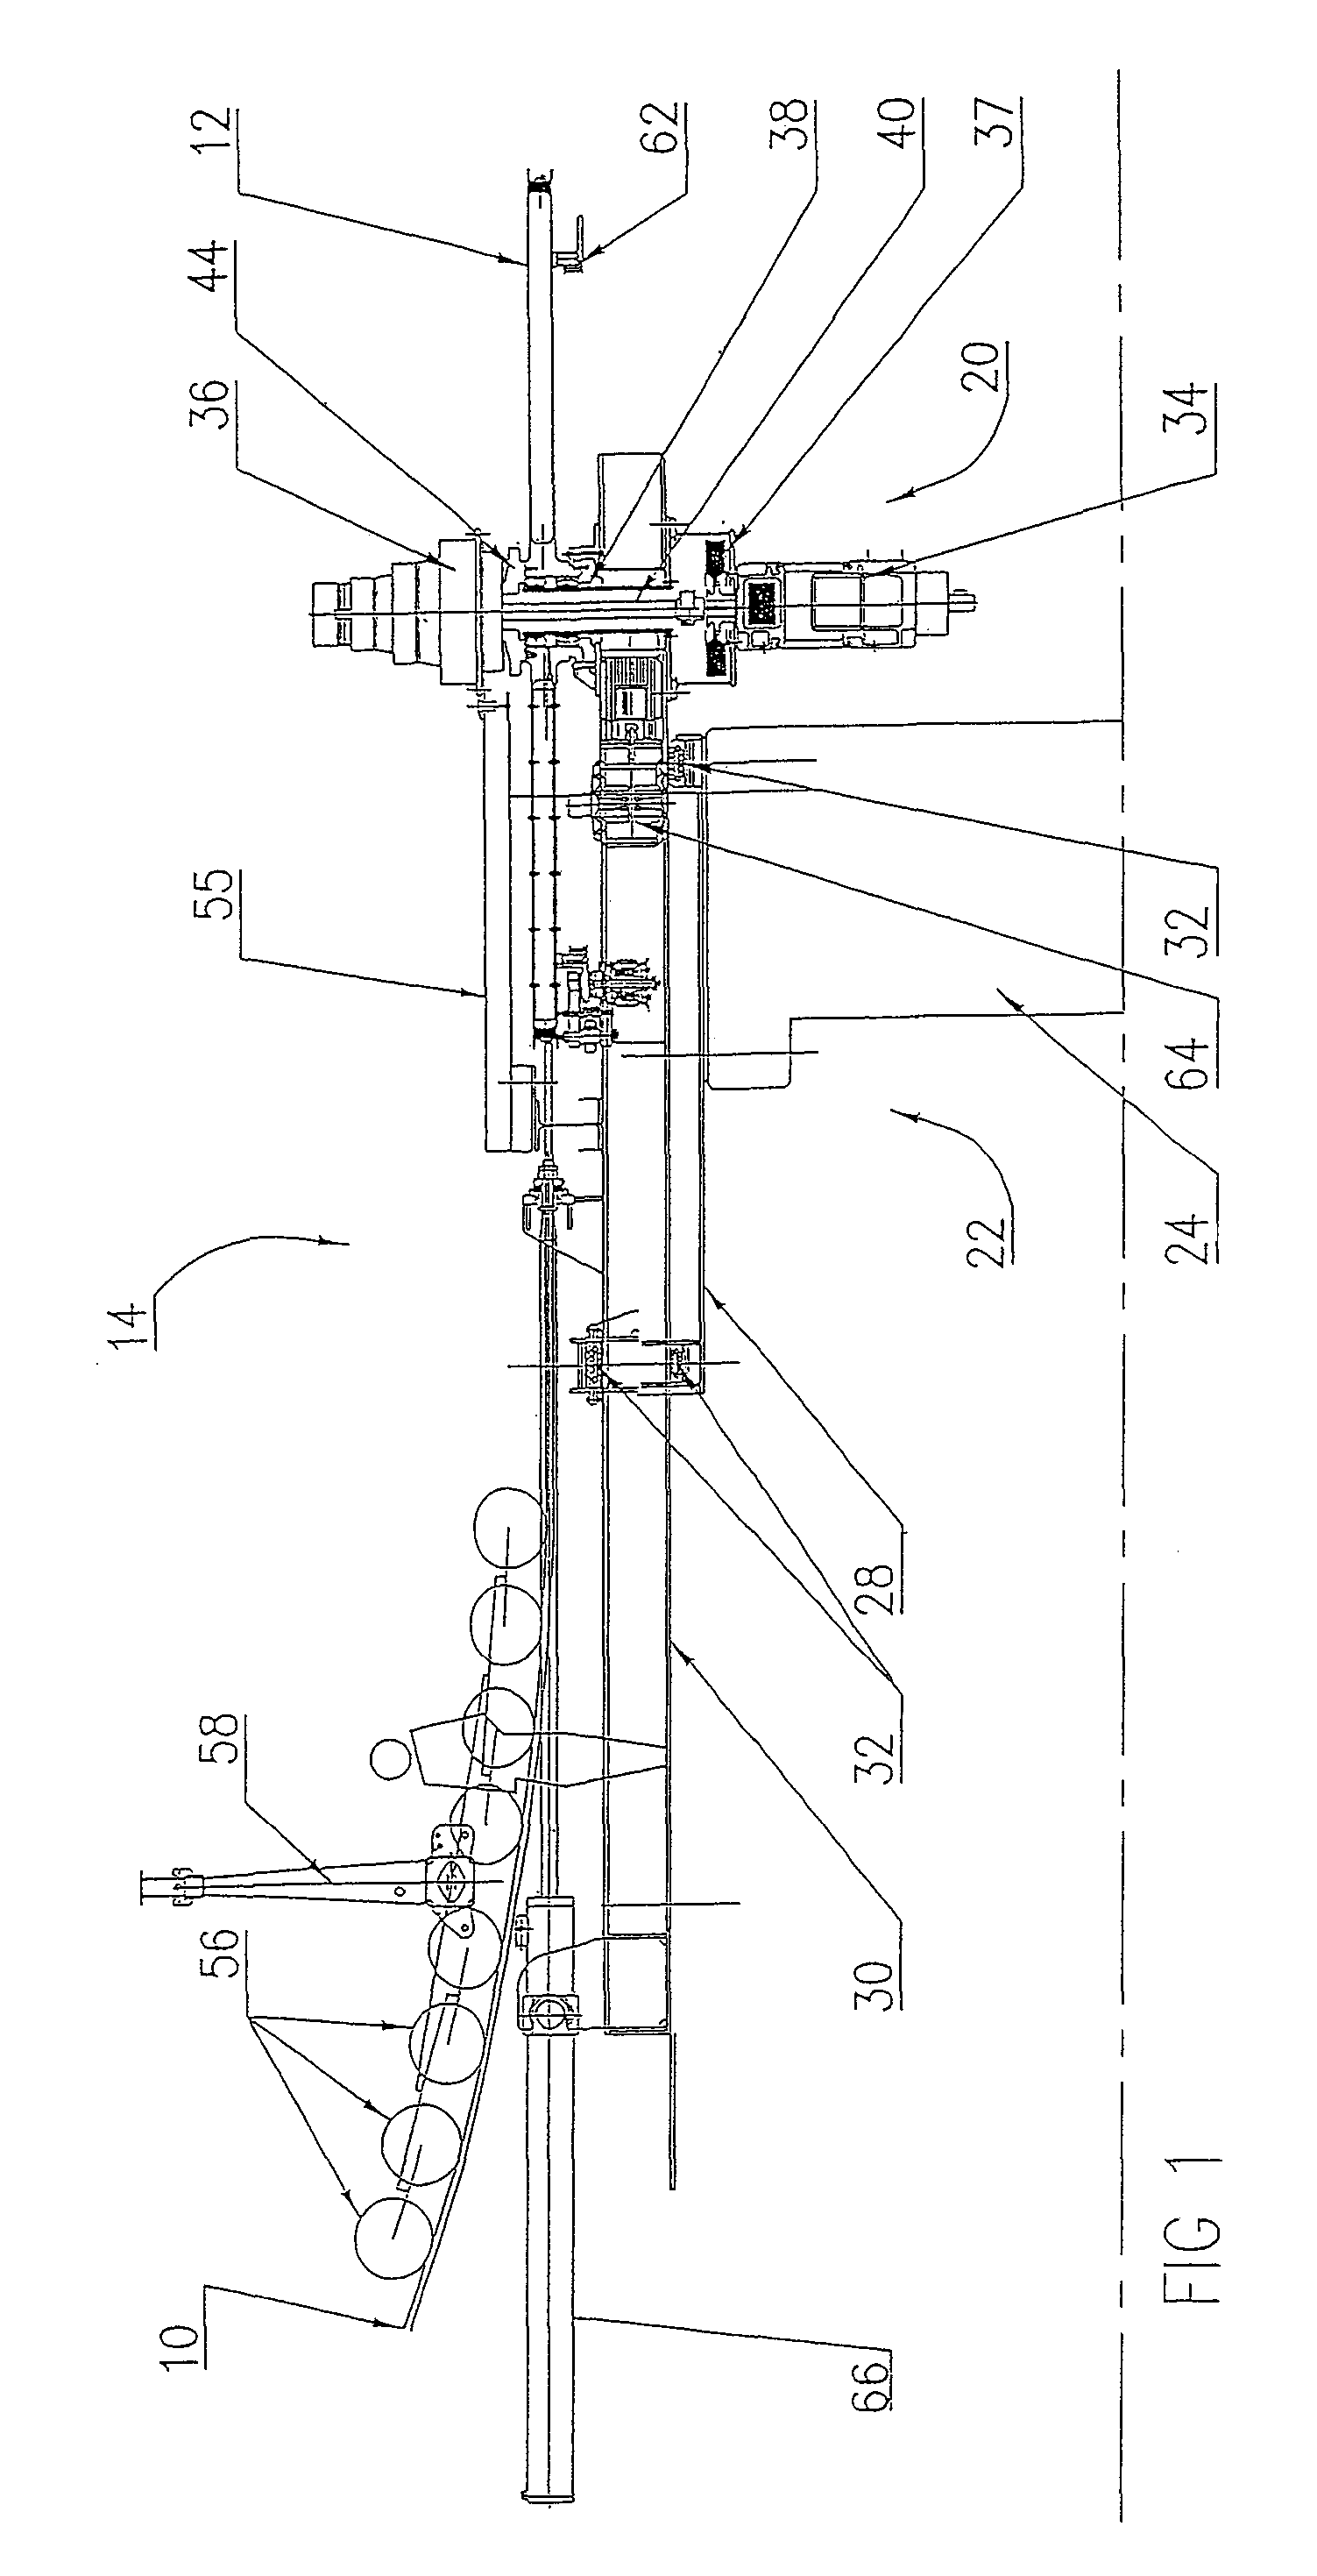 Drive device of the bull-wheel of a single carrying-hauling rope chair lift with fixed rope grips